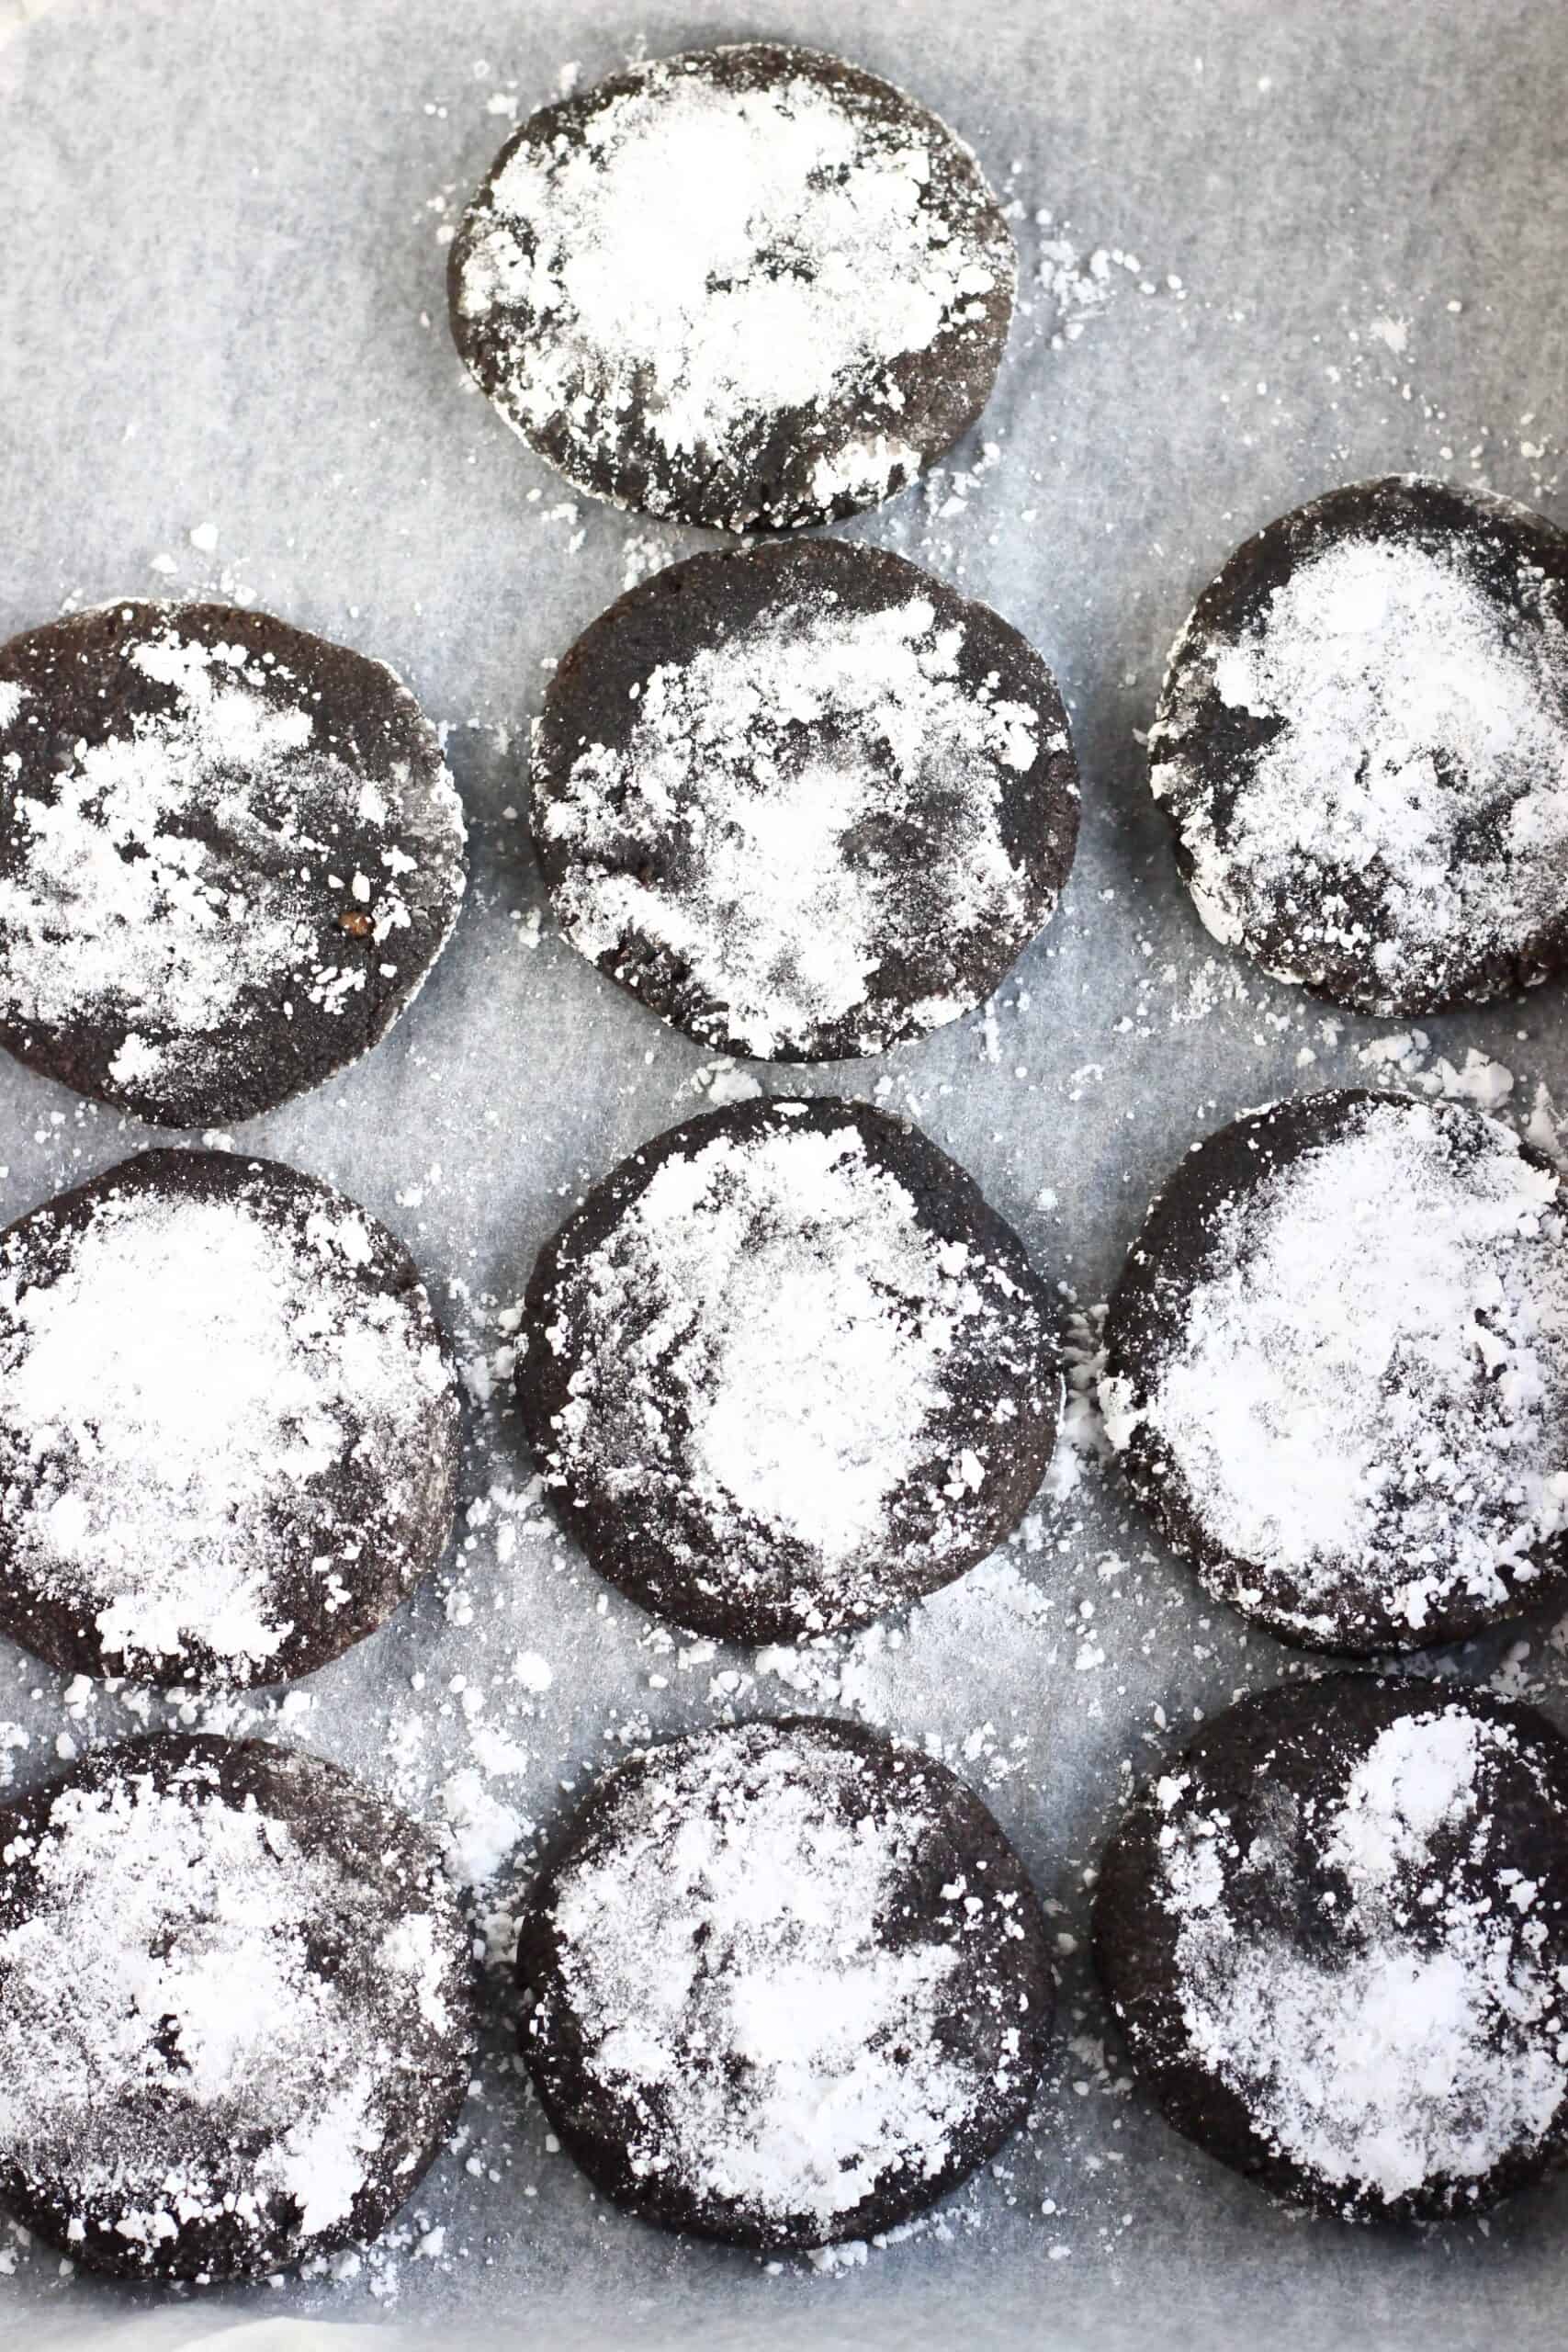 10 baked gluten-free vegan chocolate crinkle cookies on a baking tray lined with baking paper